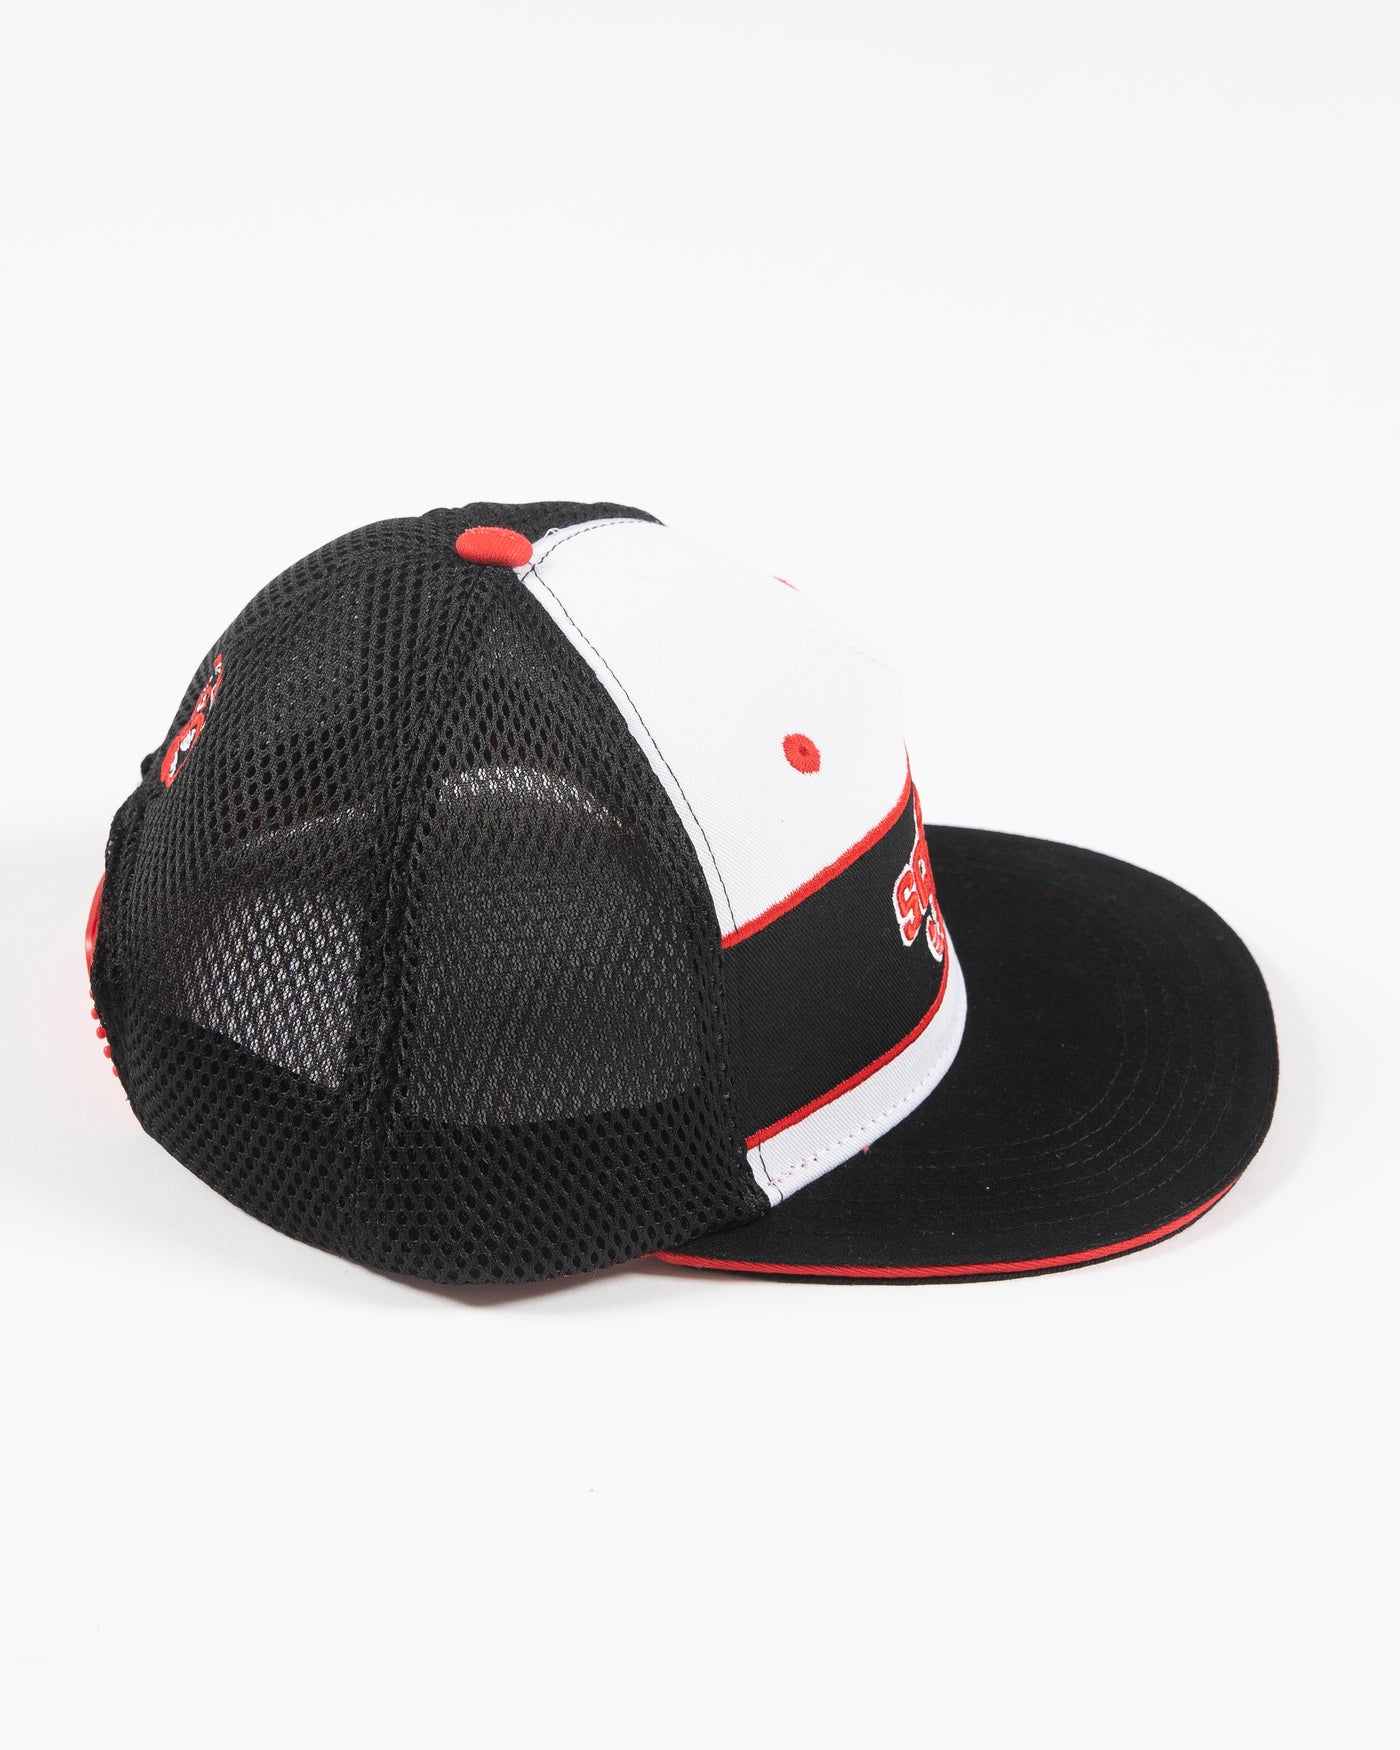 black, white and red adjustable cap with Screw City embroidered decal on front - right side lay flat